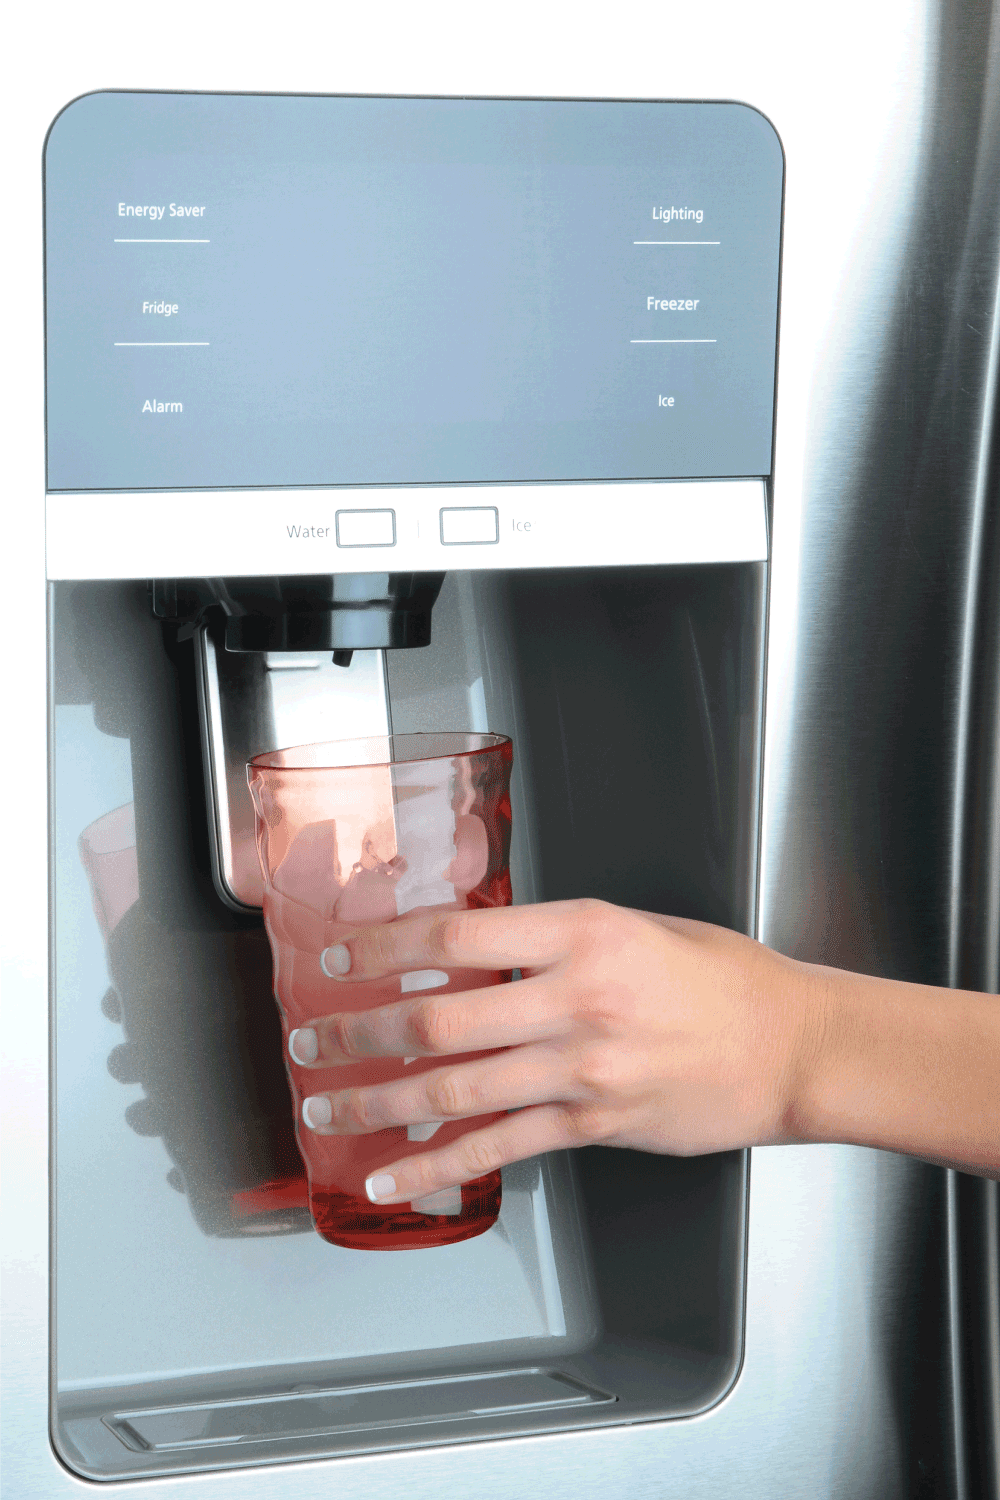 Hand holding drink is pressing on button to get fresh ice form refrigerator.